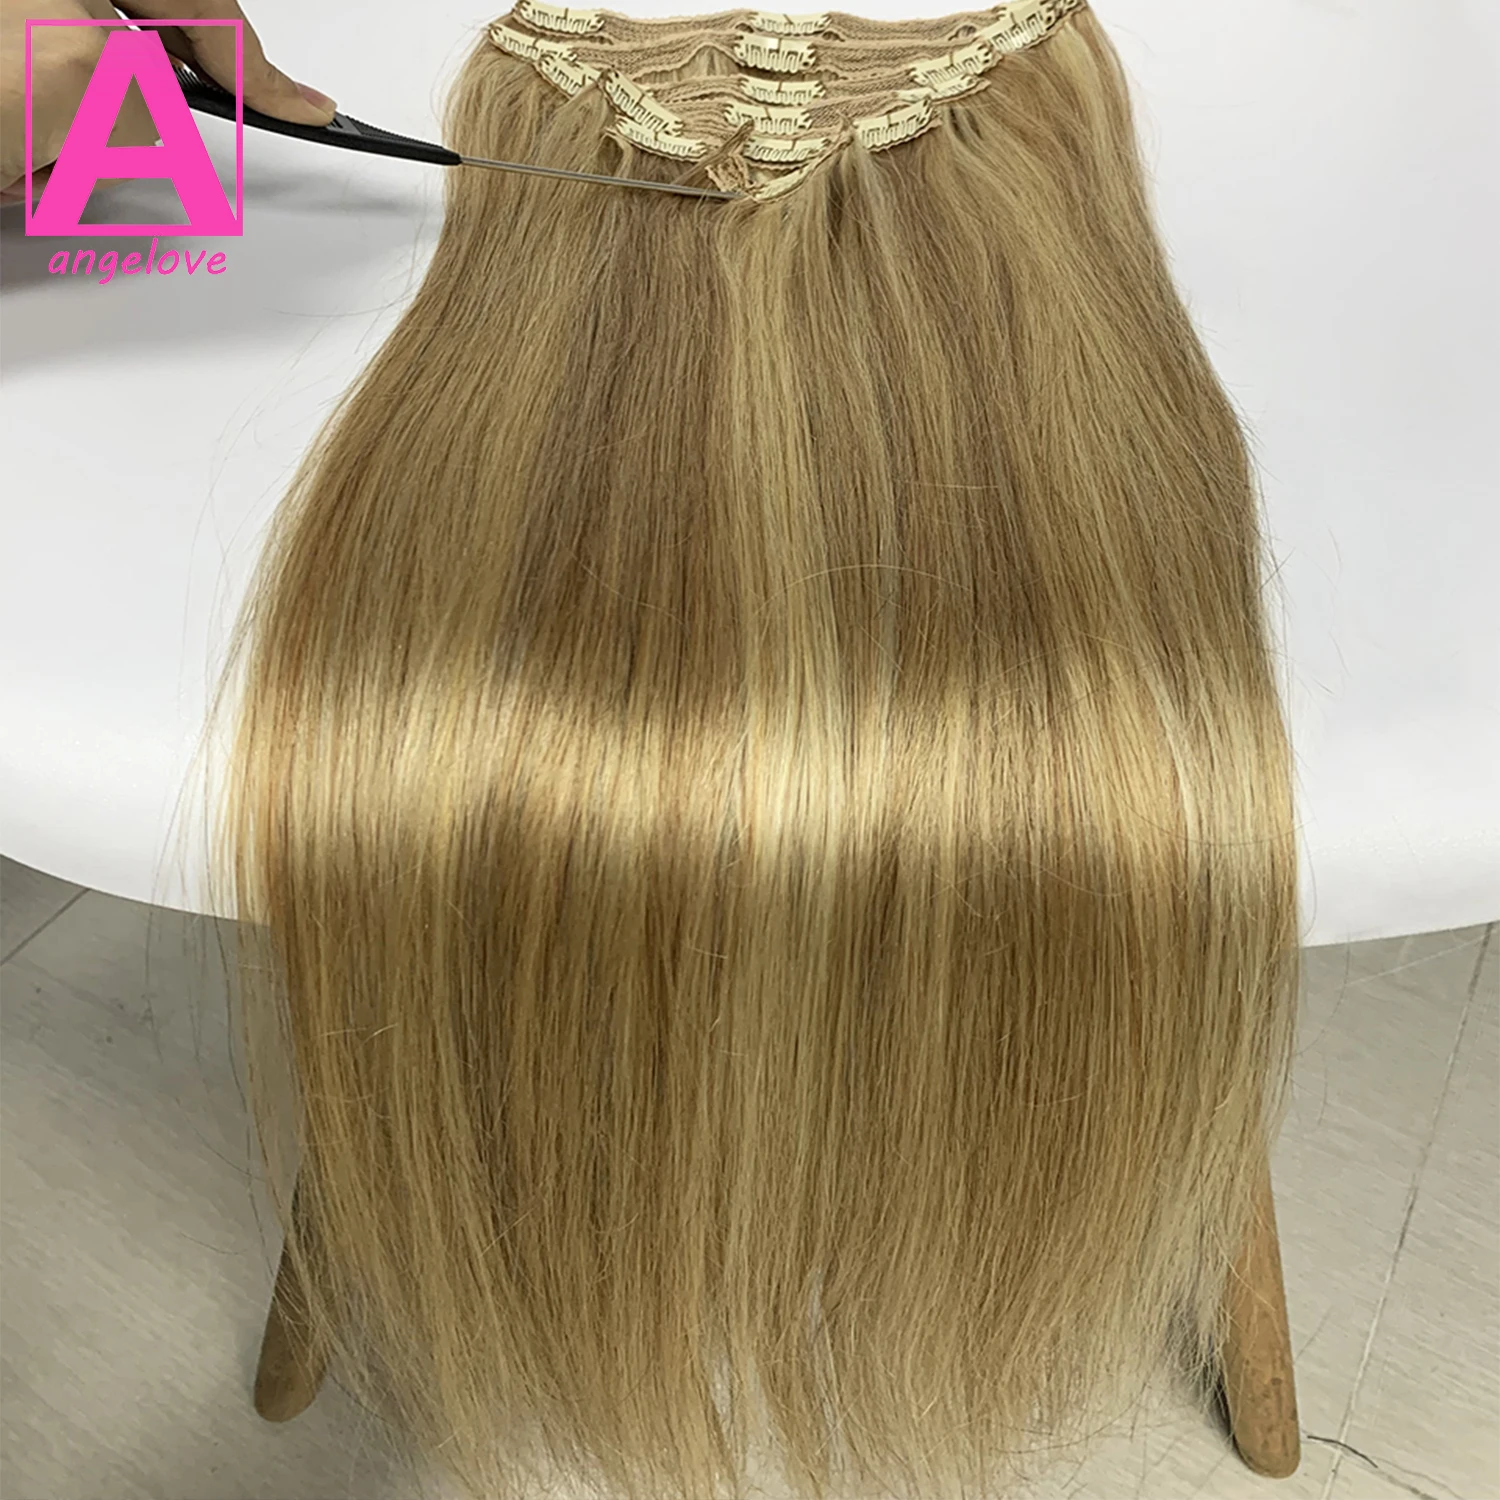 P8/613 Blonde straight Clip In Human Hair Extensions 100g/set straight Clip In Full Head Brazilian Hair Extension for Women